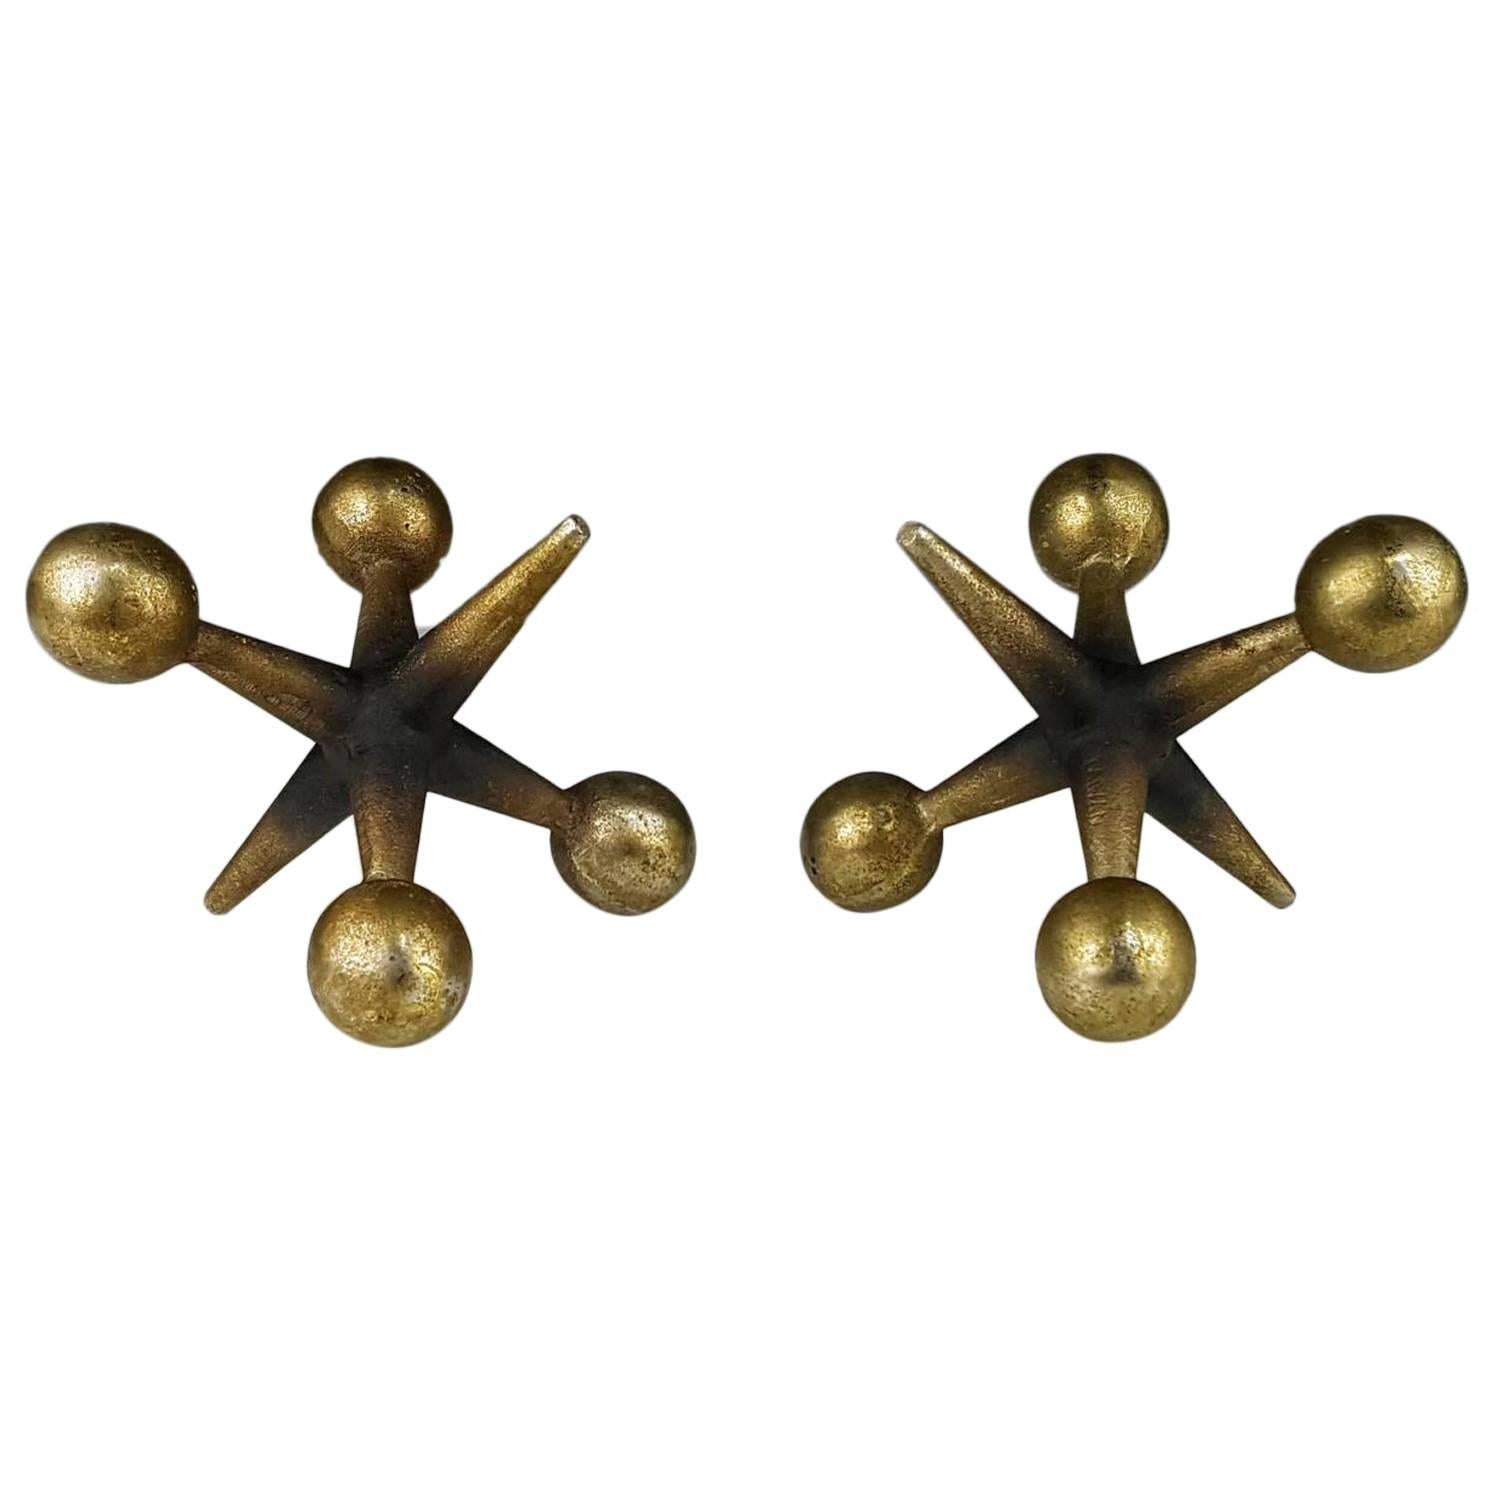 Pair of Finely Patinated Brass Jacks Bookends After Billy Curry, 1960s